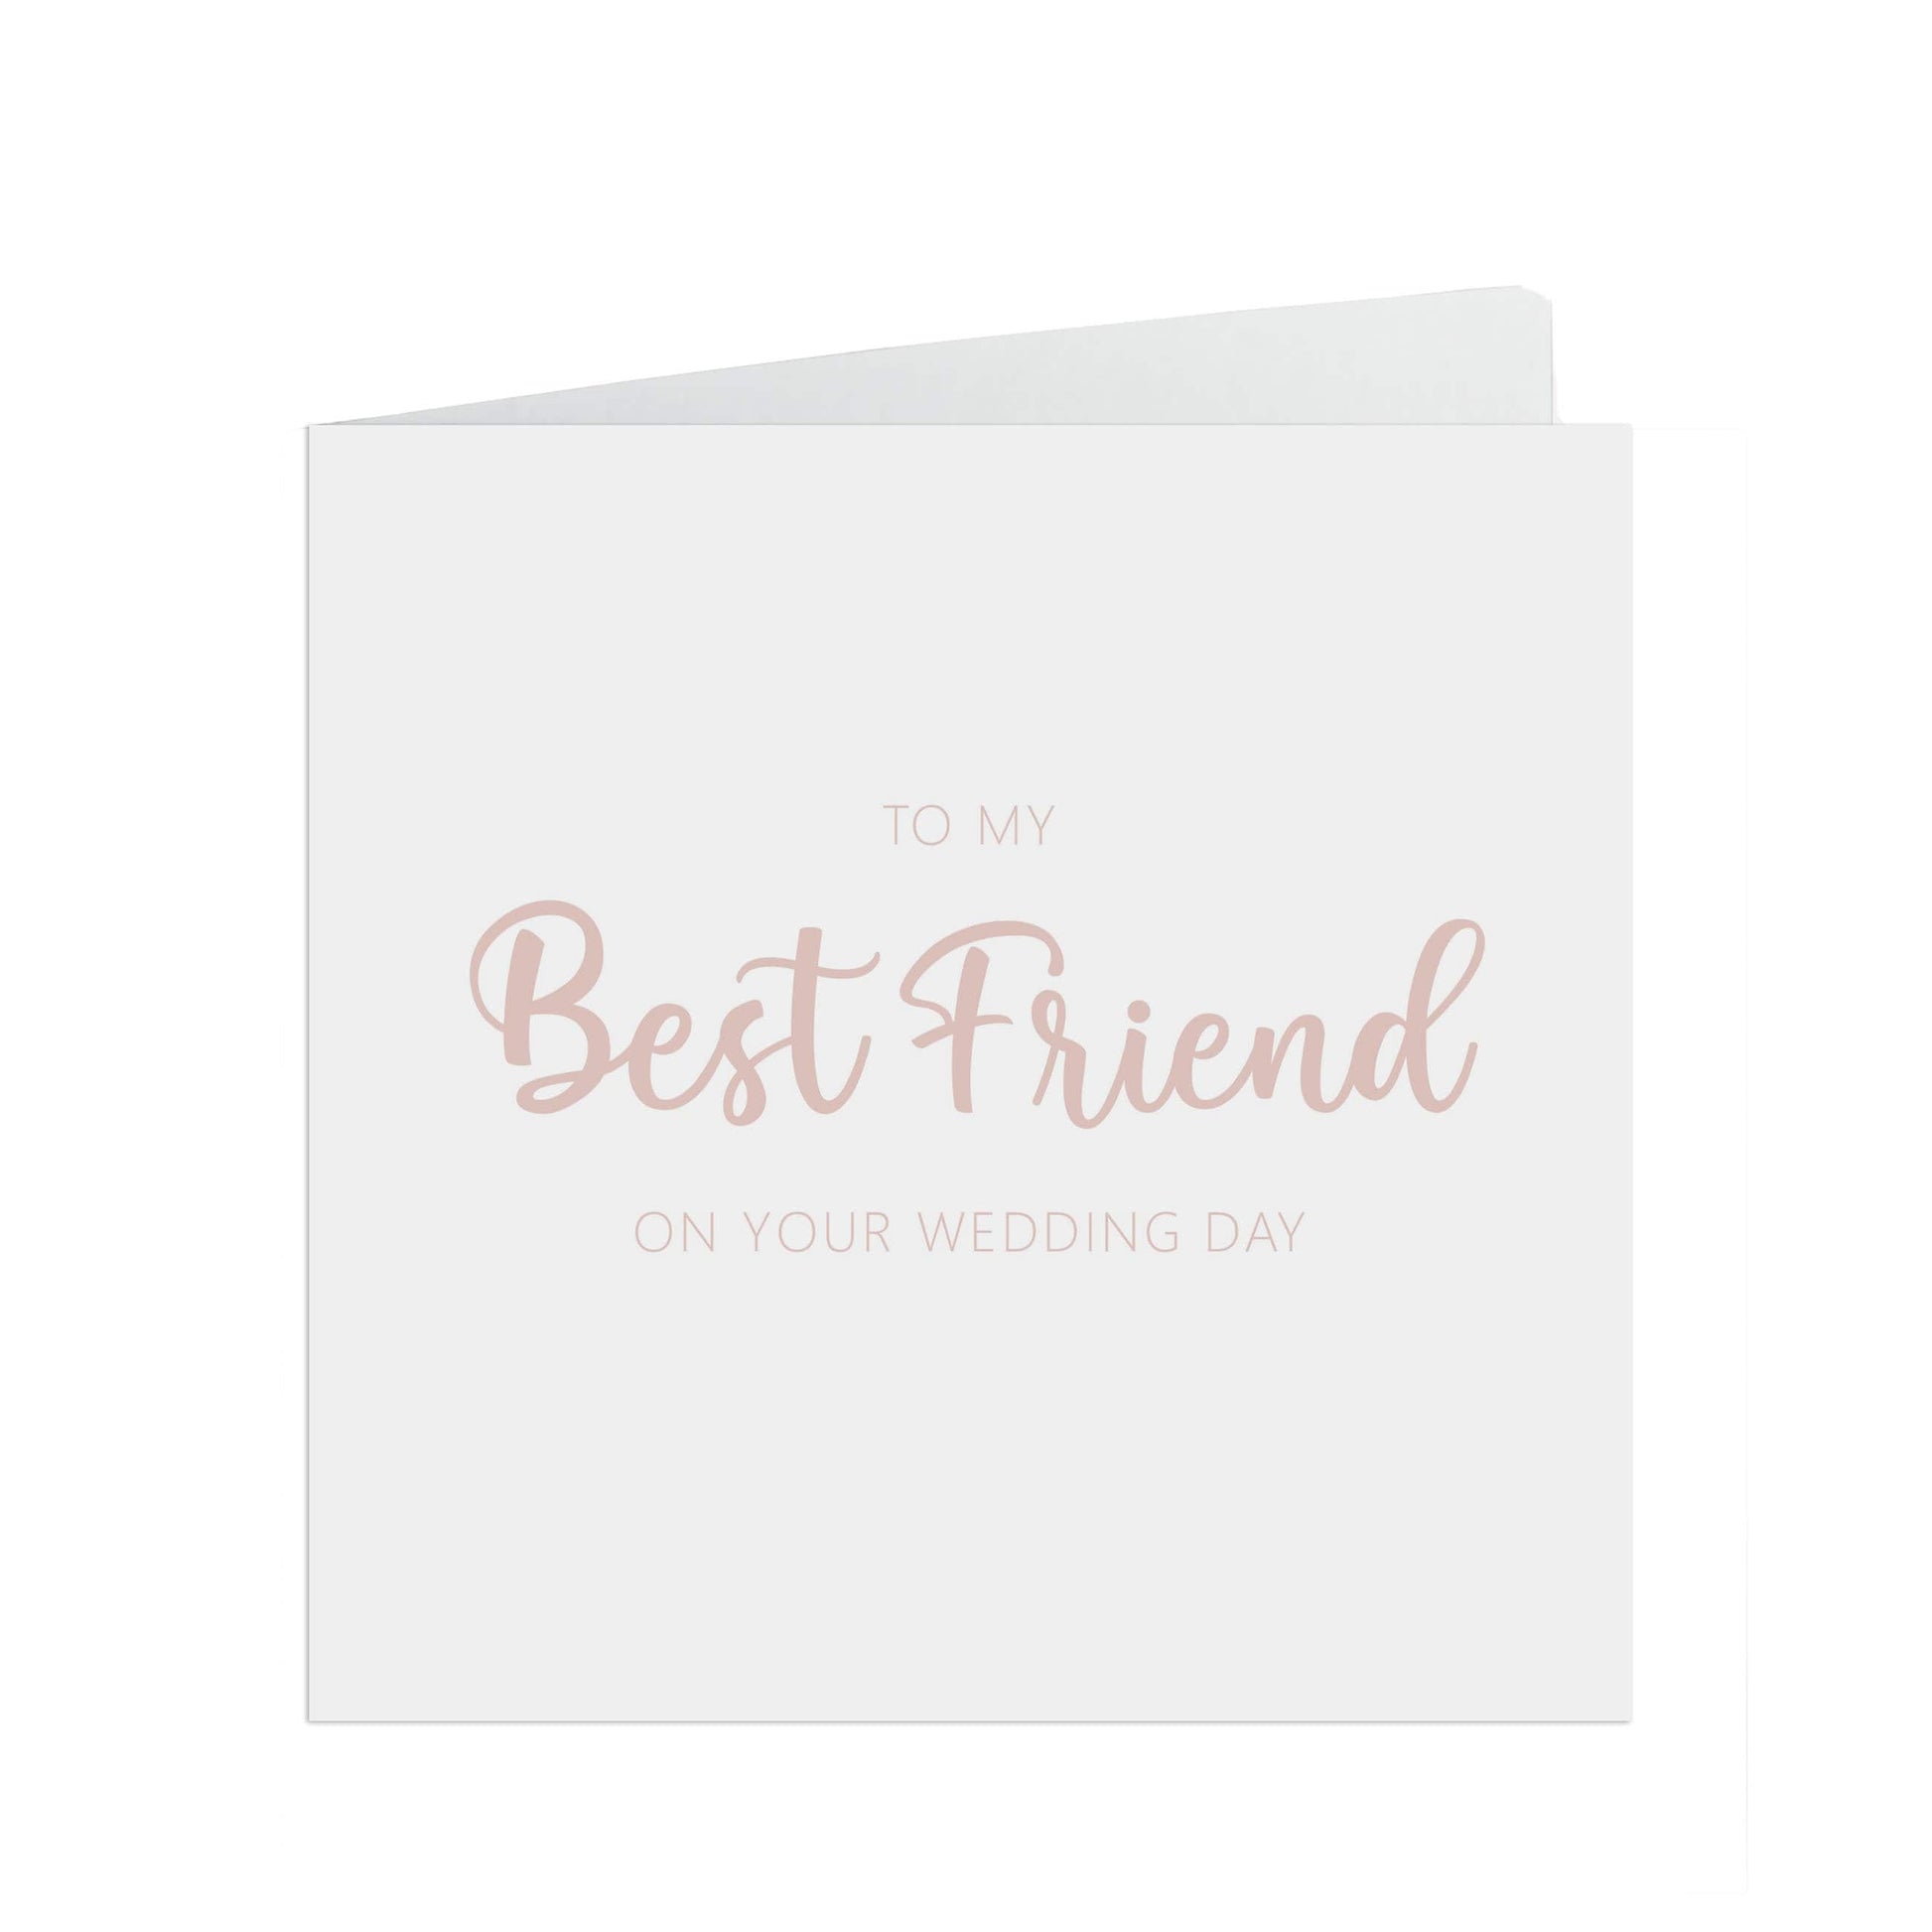 Best Friend On Your Wedding Day Card, Rose Gold Effect 6x6 Inches In Size With A White Envelope